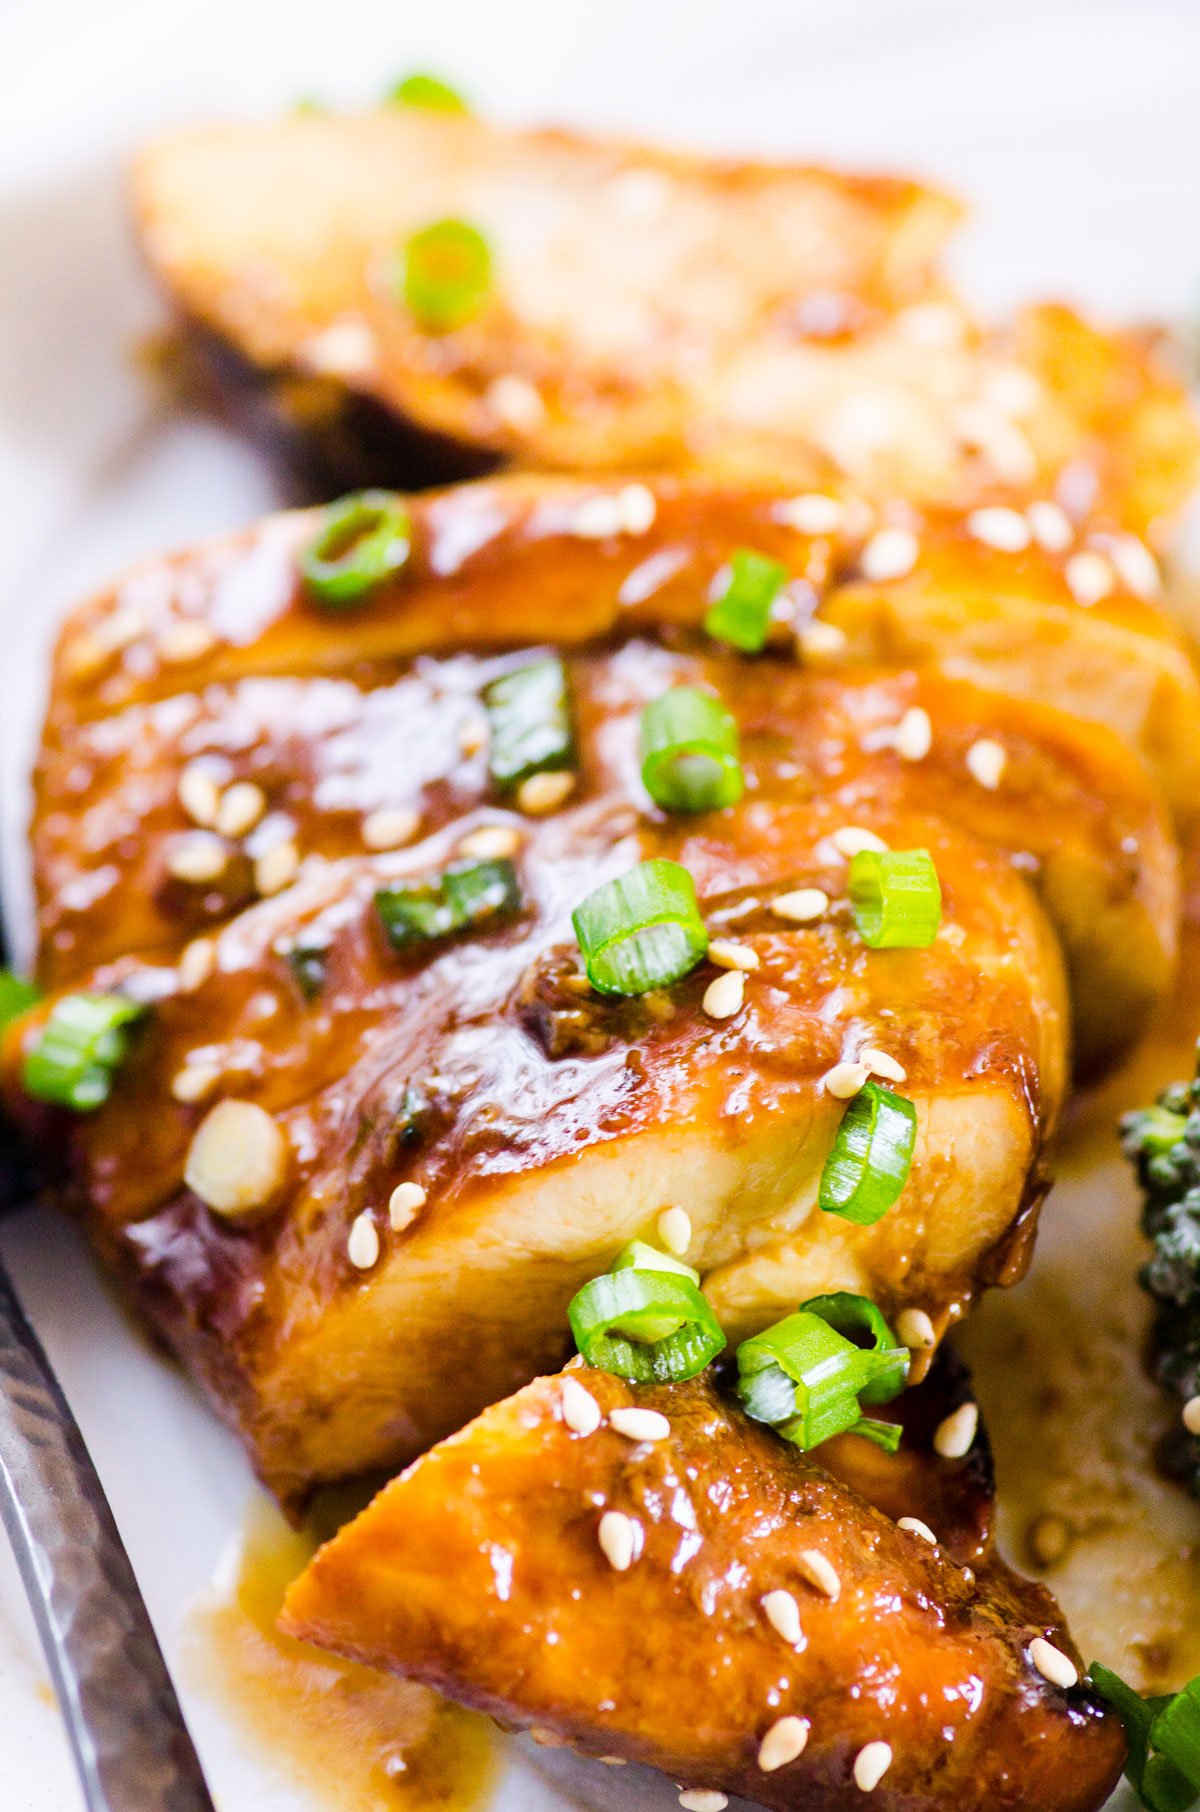 Baked honey garlic chicken breast sliced with green onion and sesame seeds.